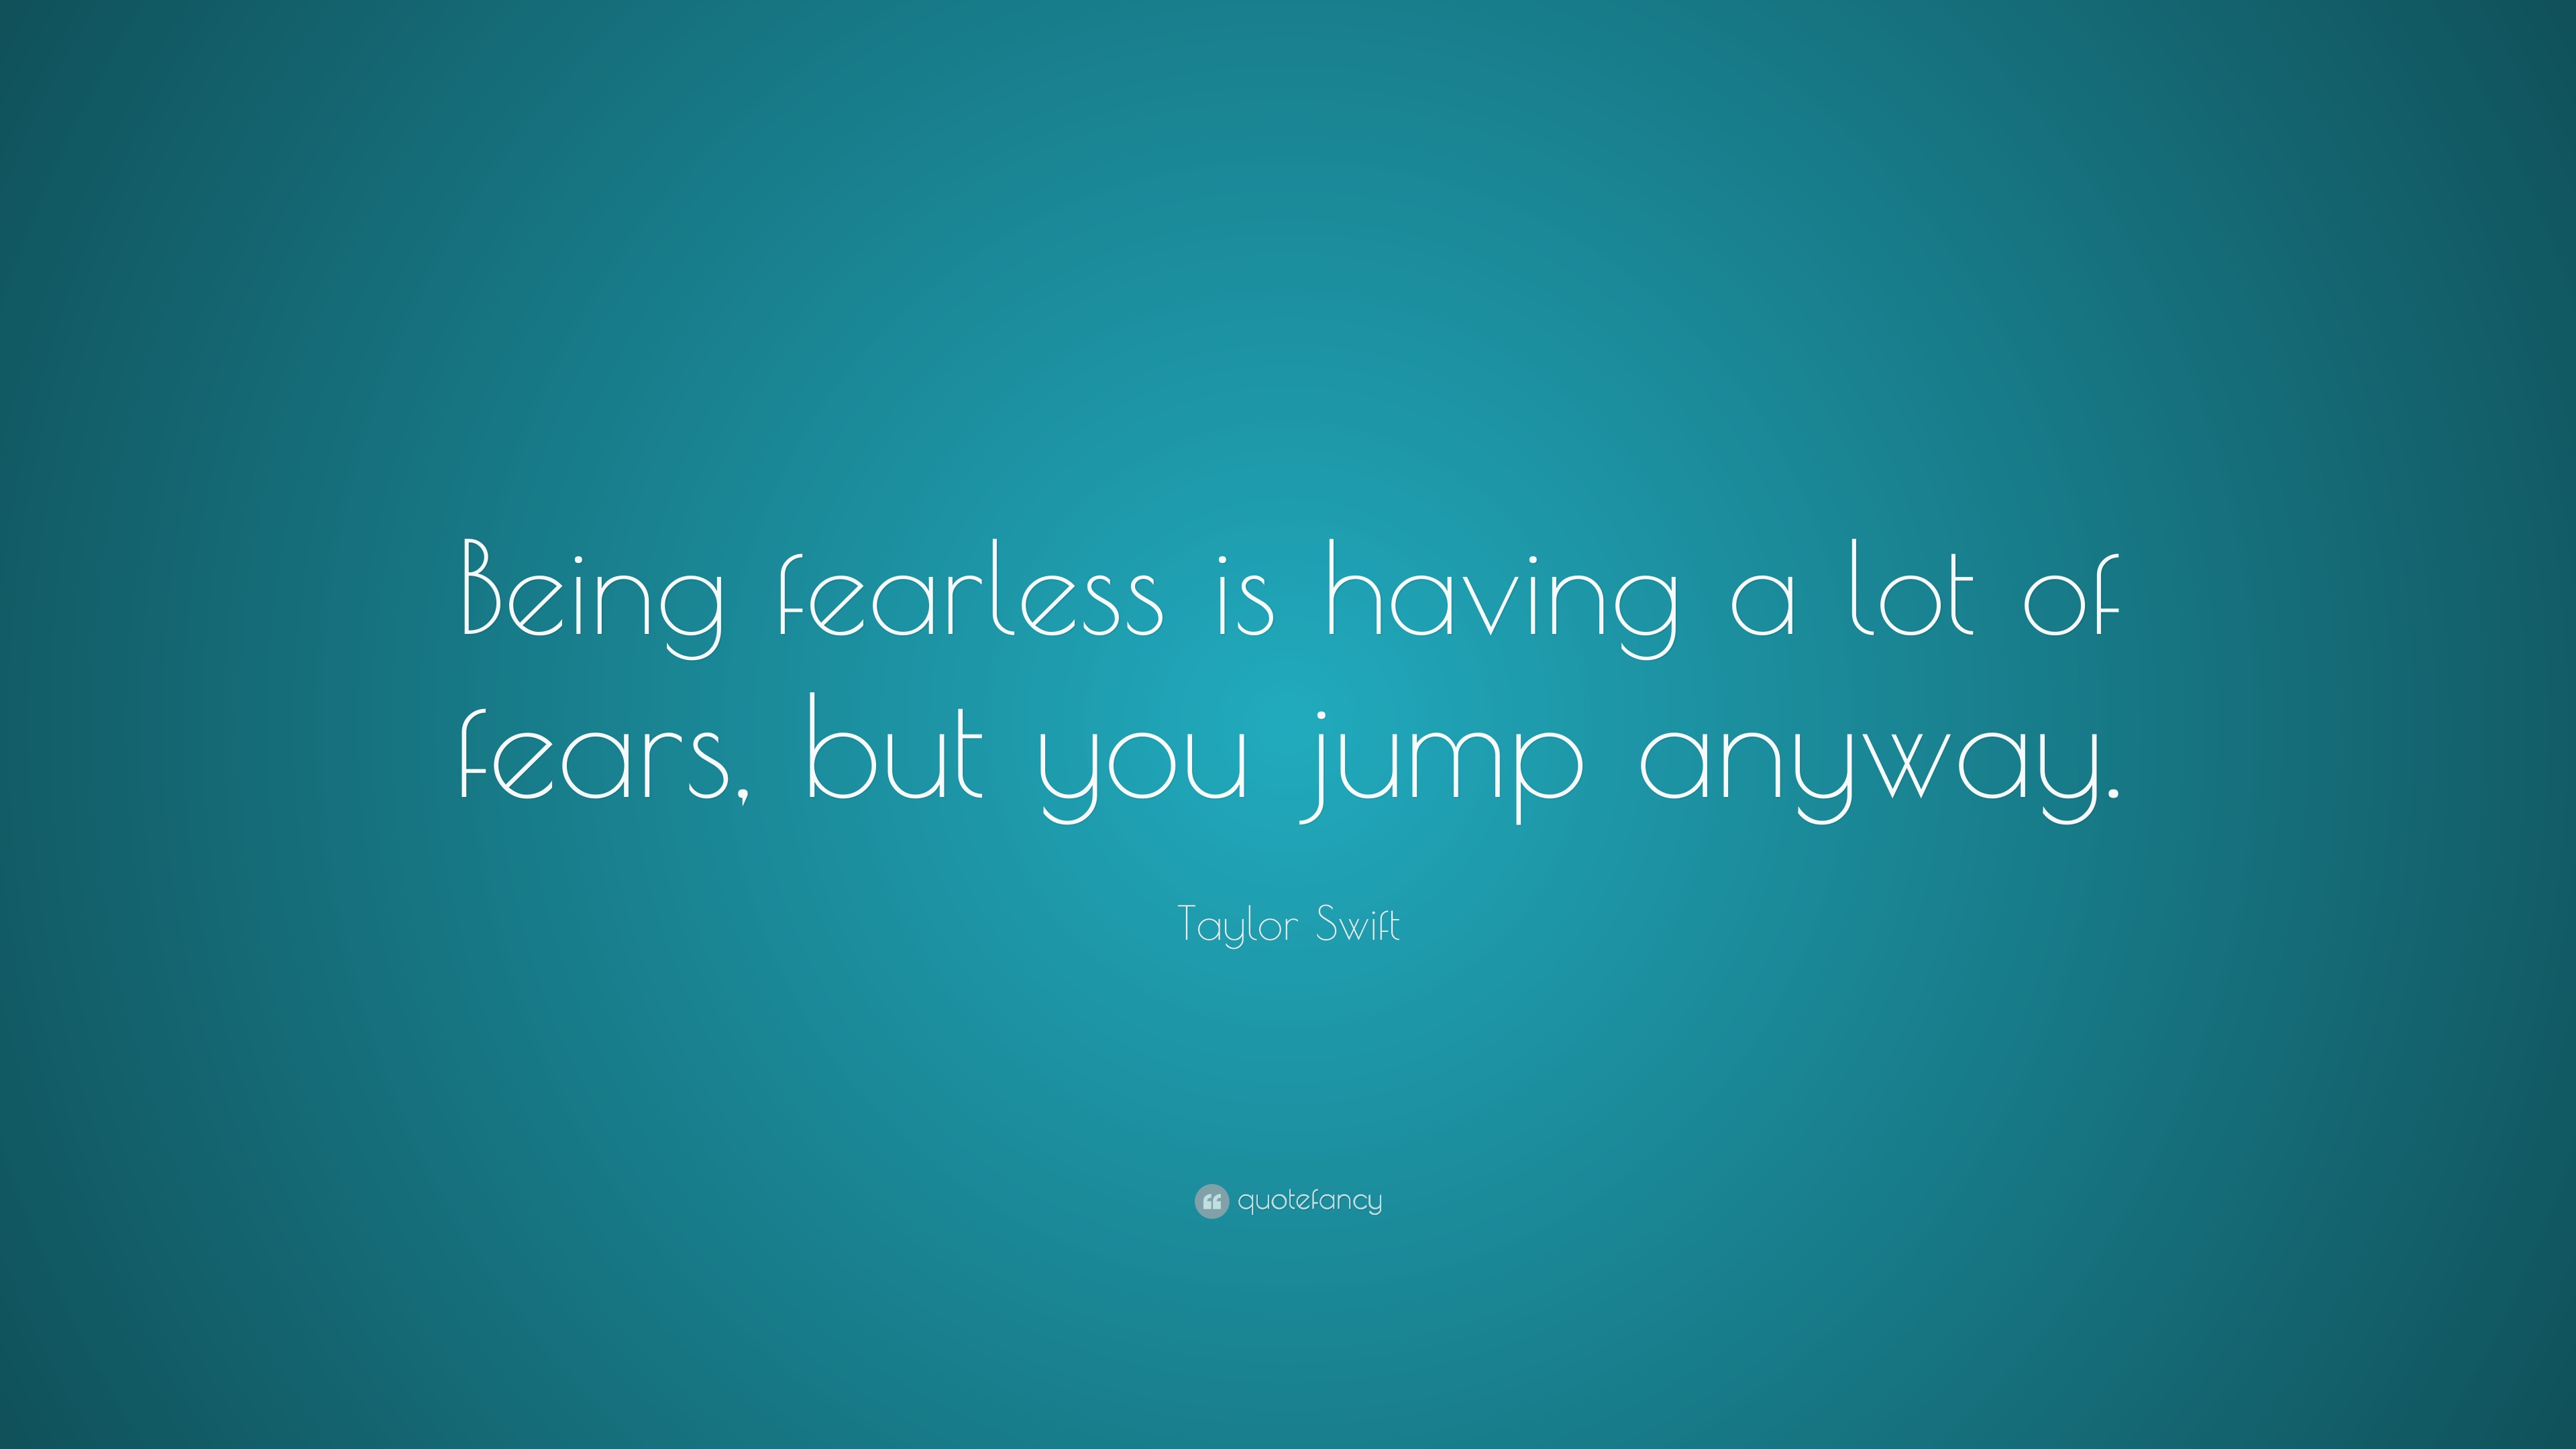 Taylor Swift Quote: “Being fearless is having a lot of fears, but ...